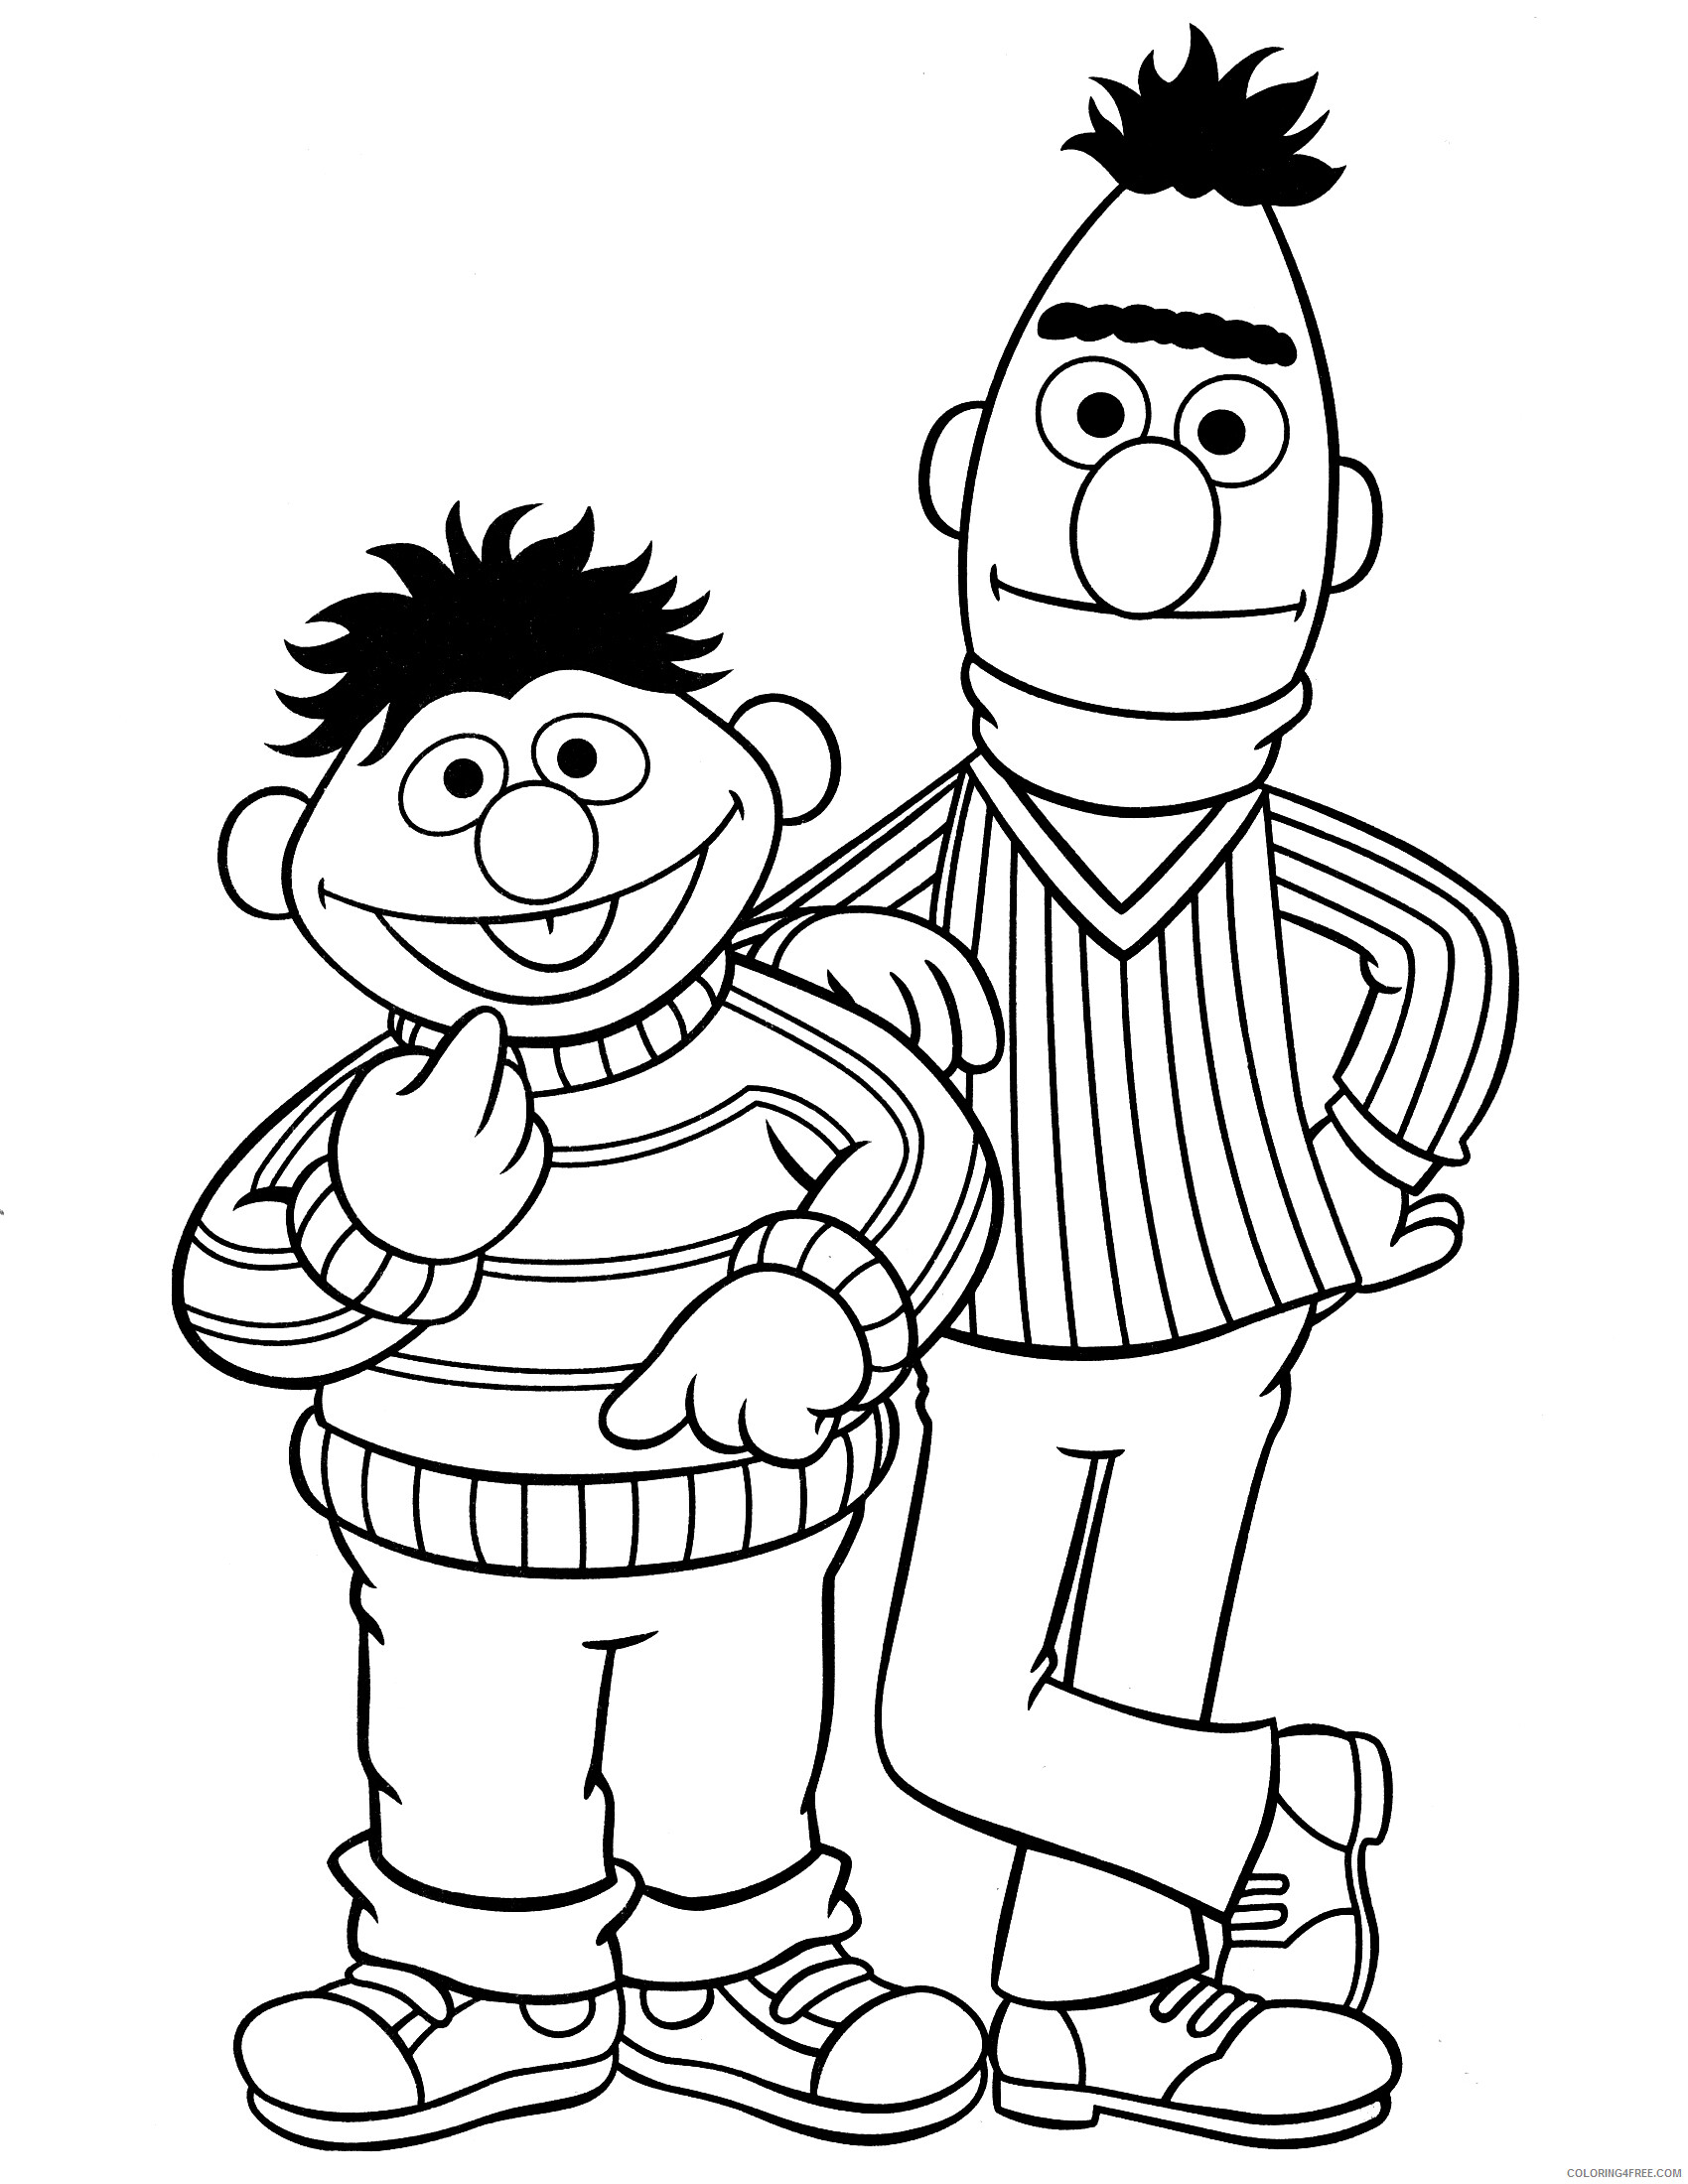 Sesame Street Coloring Pages TV Film Sesame Street Pictures Printable 2020 07442 Coloring4free